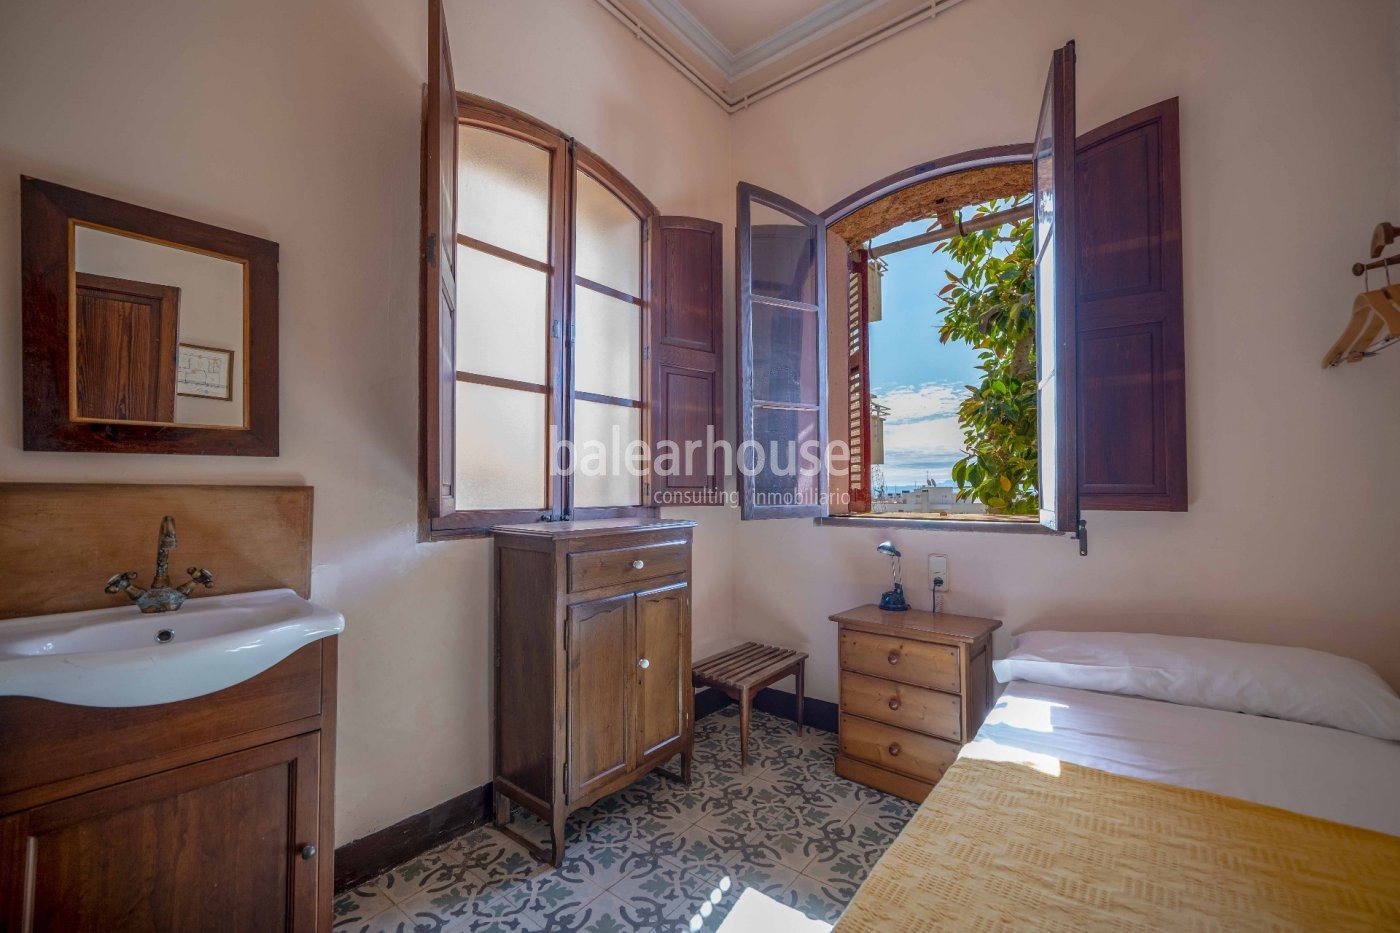 Unique traditional Mallorcan house with enormous hotel potential in El Terreno